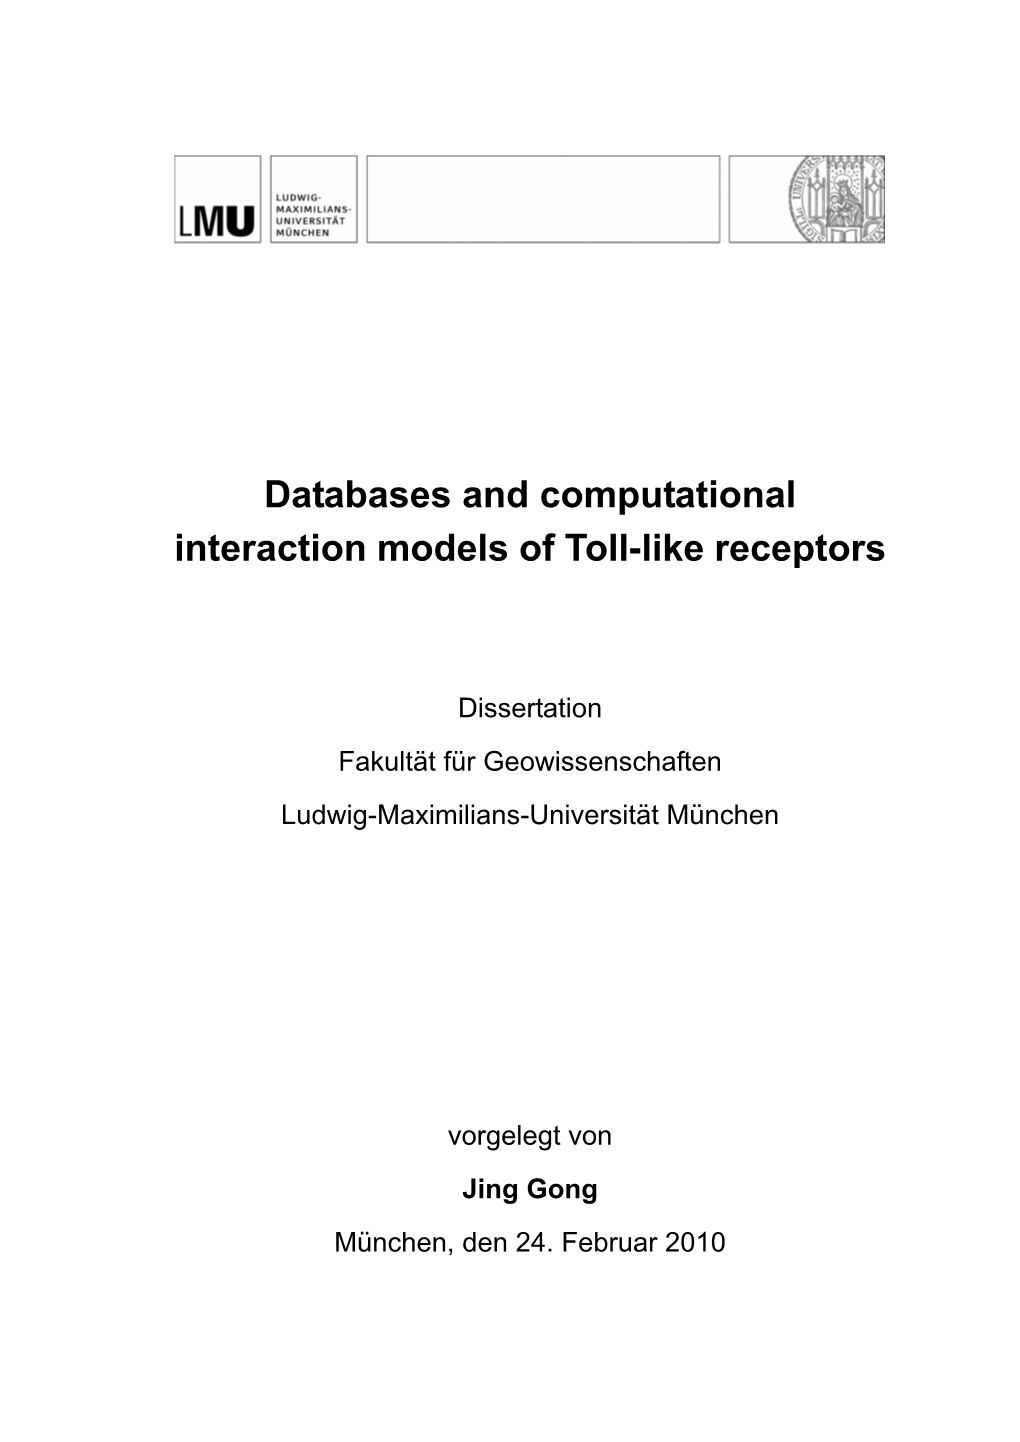 Databases and Computational Interaction Models of Toll-Like Receptors